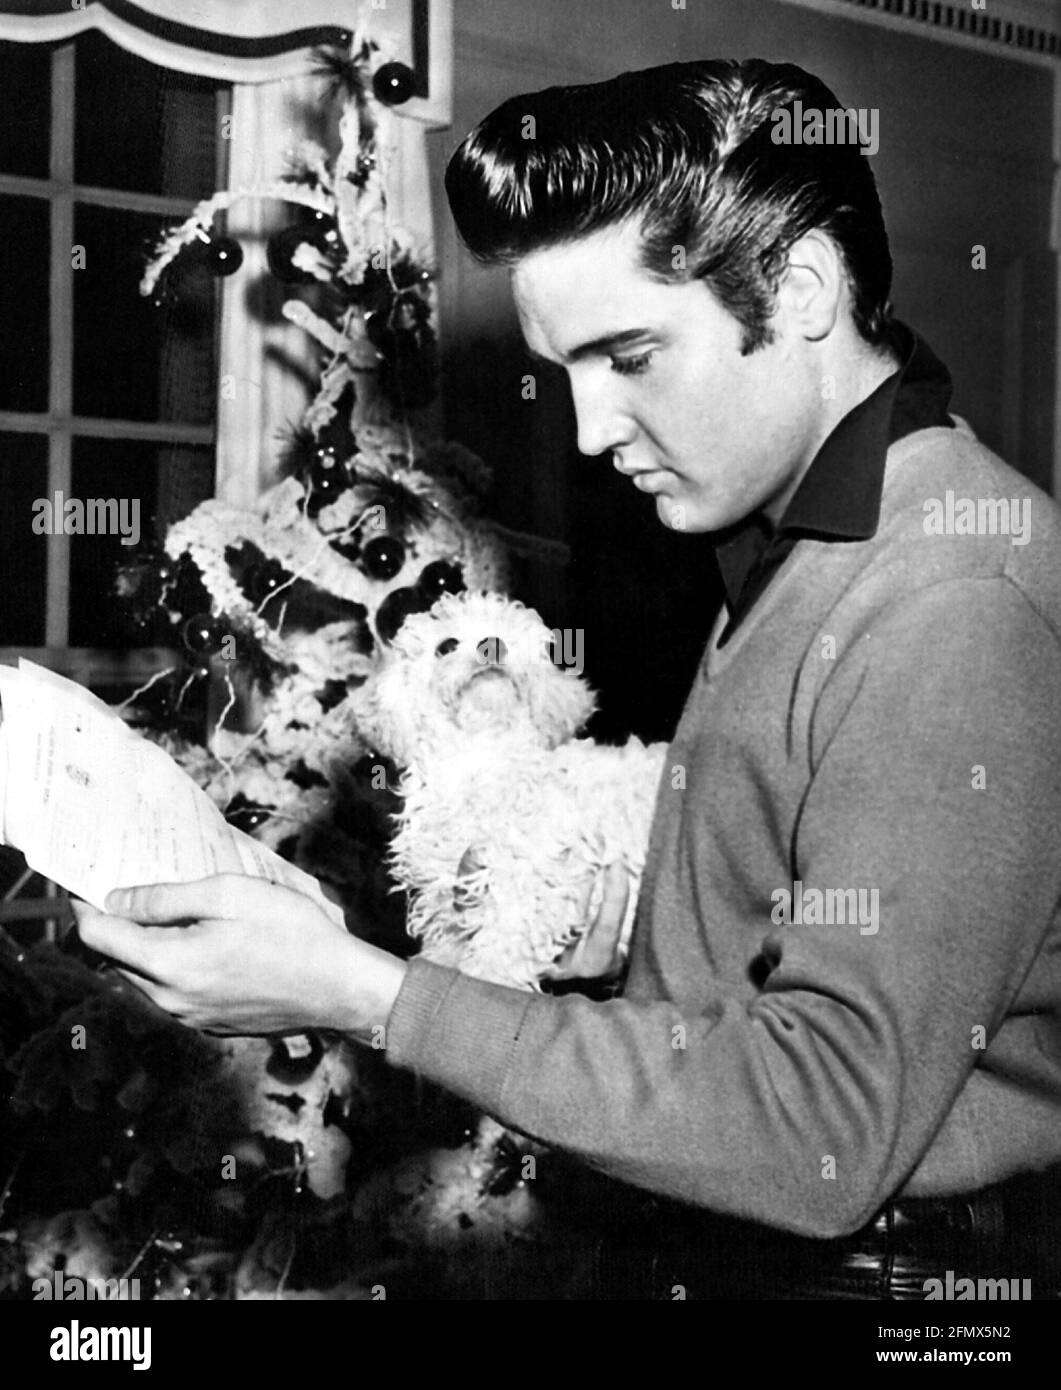 Presley, Elvis, 8.1.1935 - 16.8.1977, American singer and actor, half length, christmas, late 1950s, ADDITIONAL-RIGHTS-CLEARANCE-INFO-NOT-AVAILABLE Stock Photo